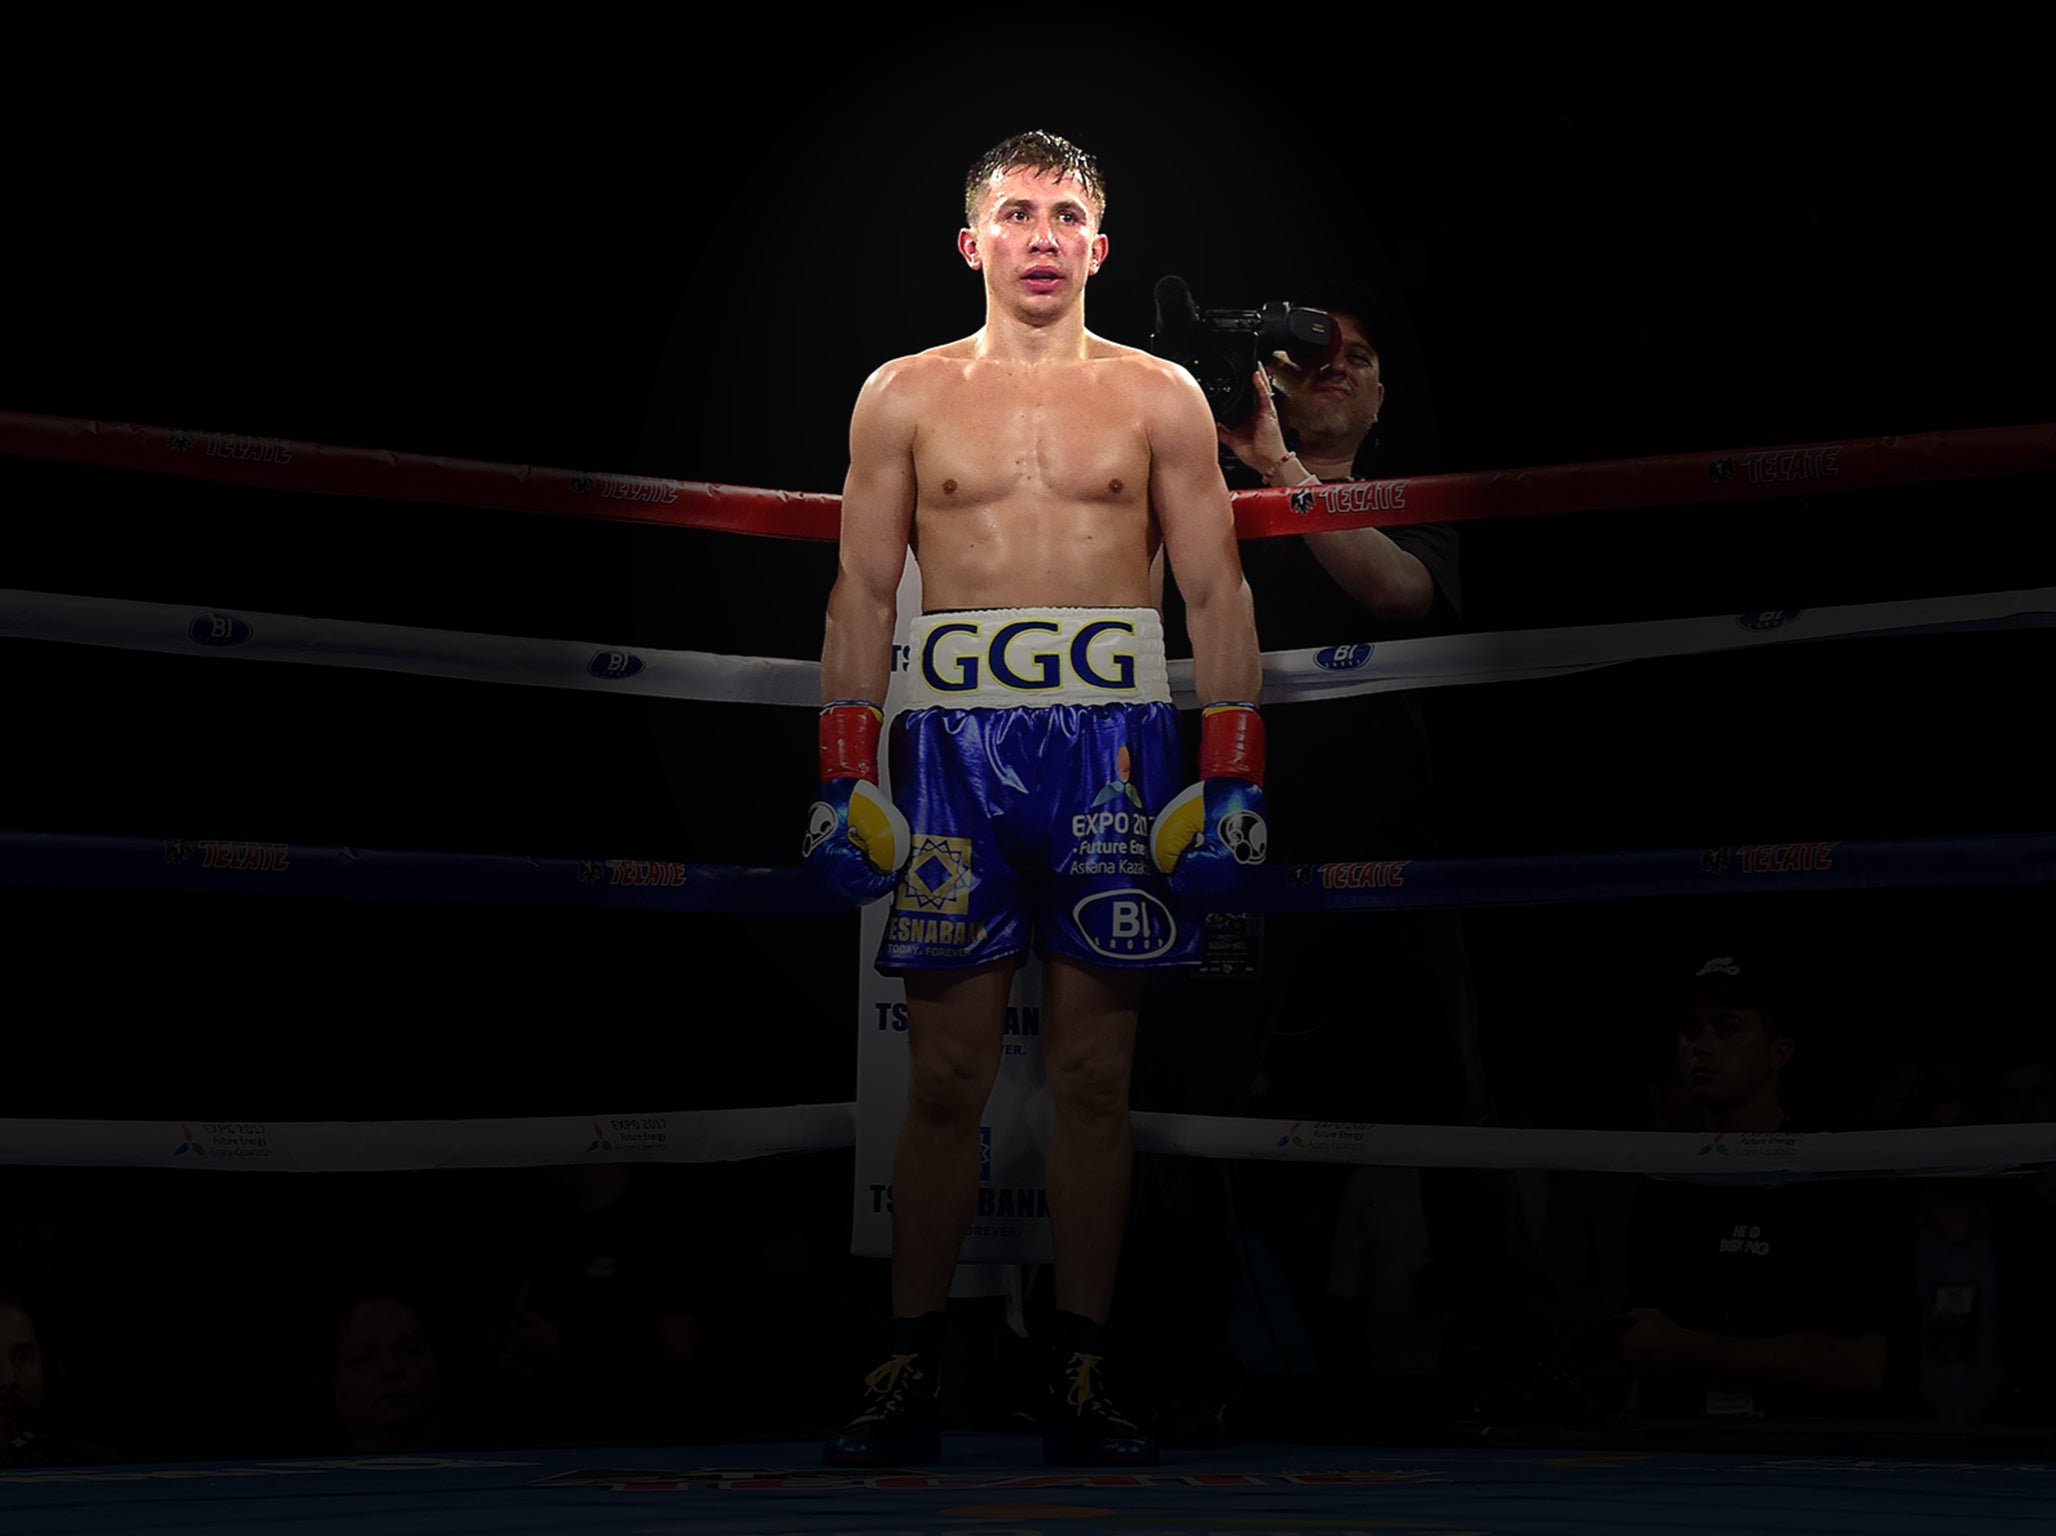 Golovkin's legacy is on the line when he takes on Canelo